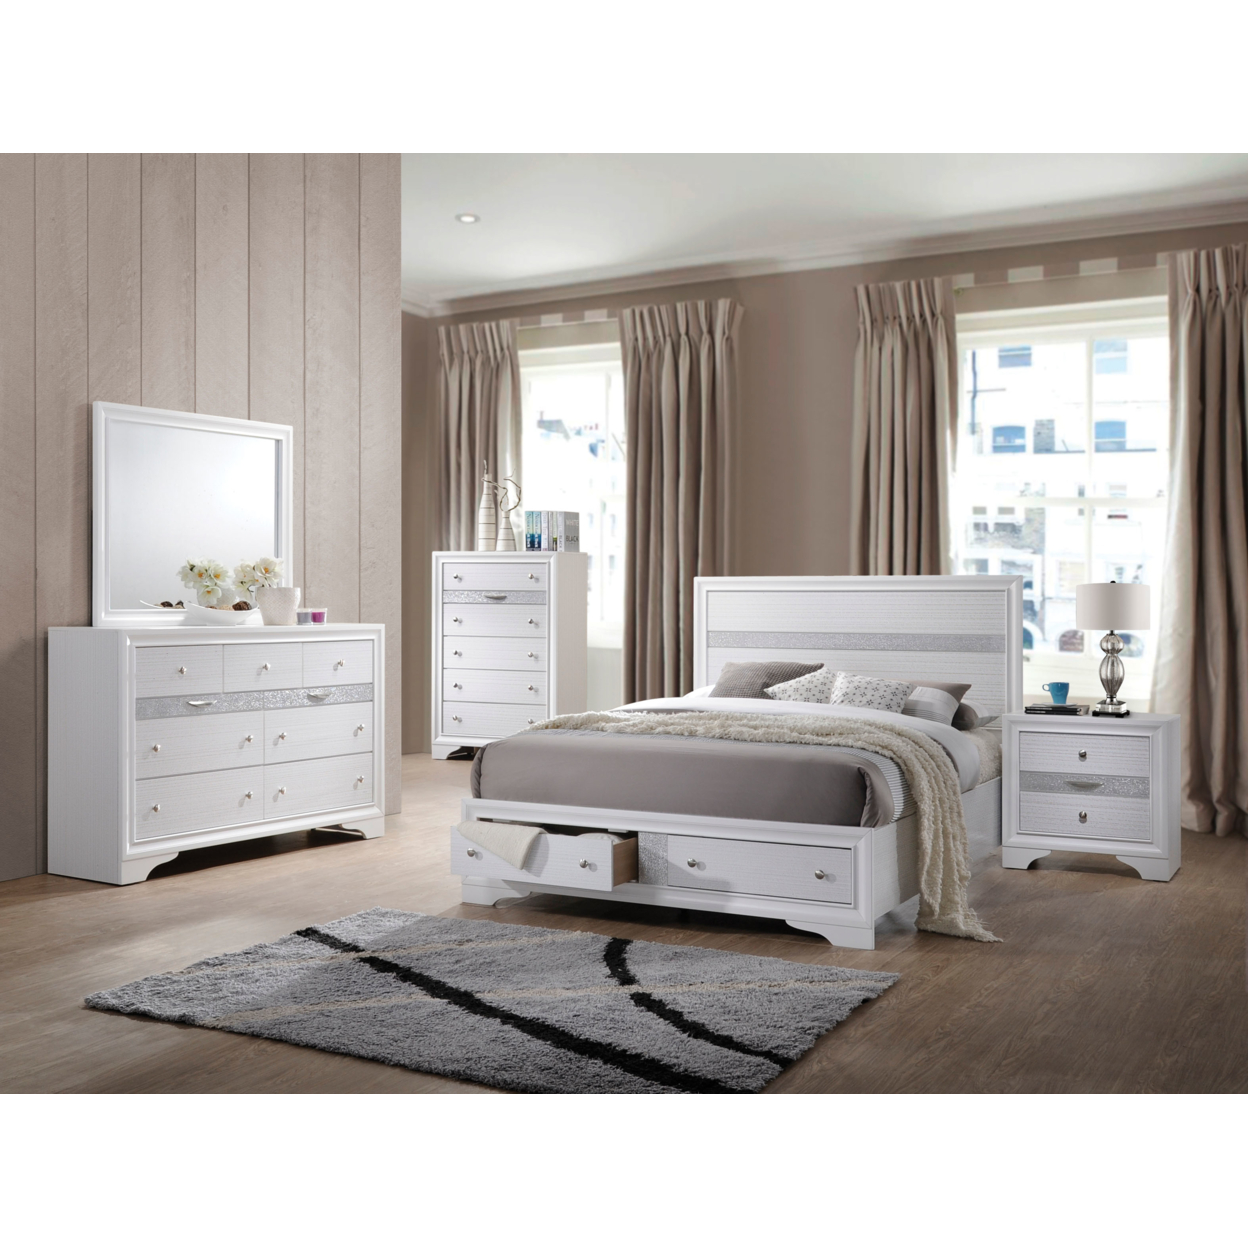 Classy Queen Size Bed With Storage, White- Saltoro Sherpi